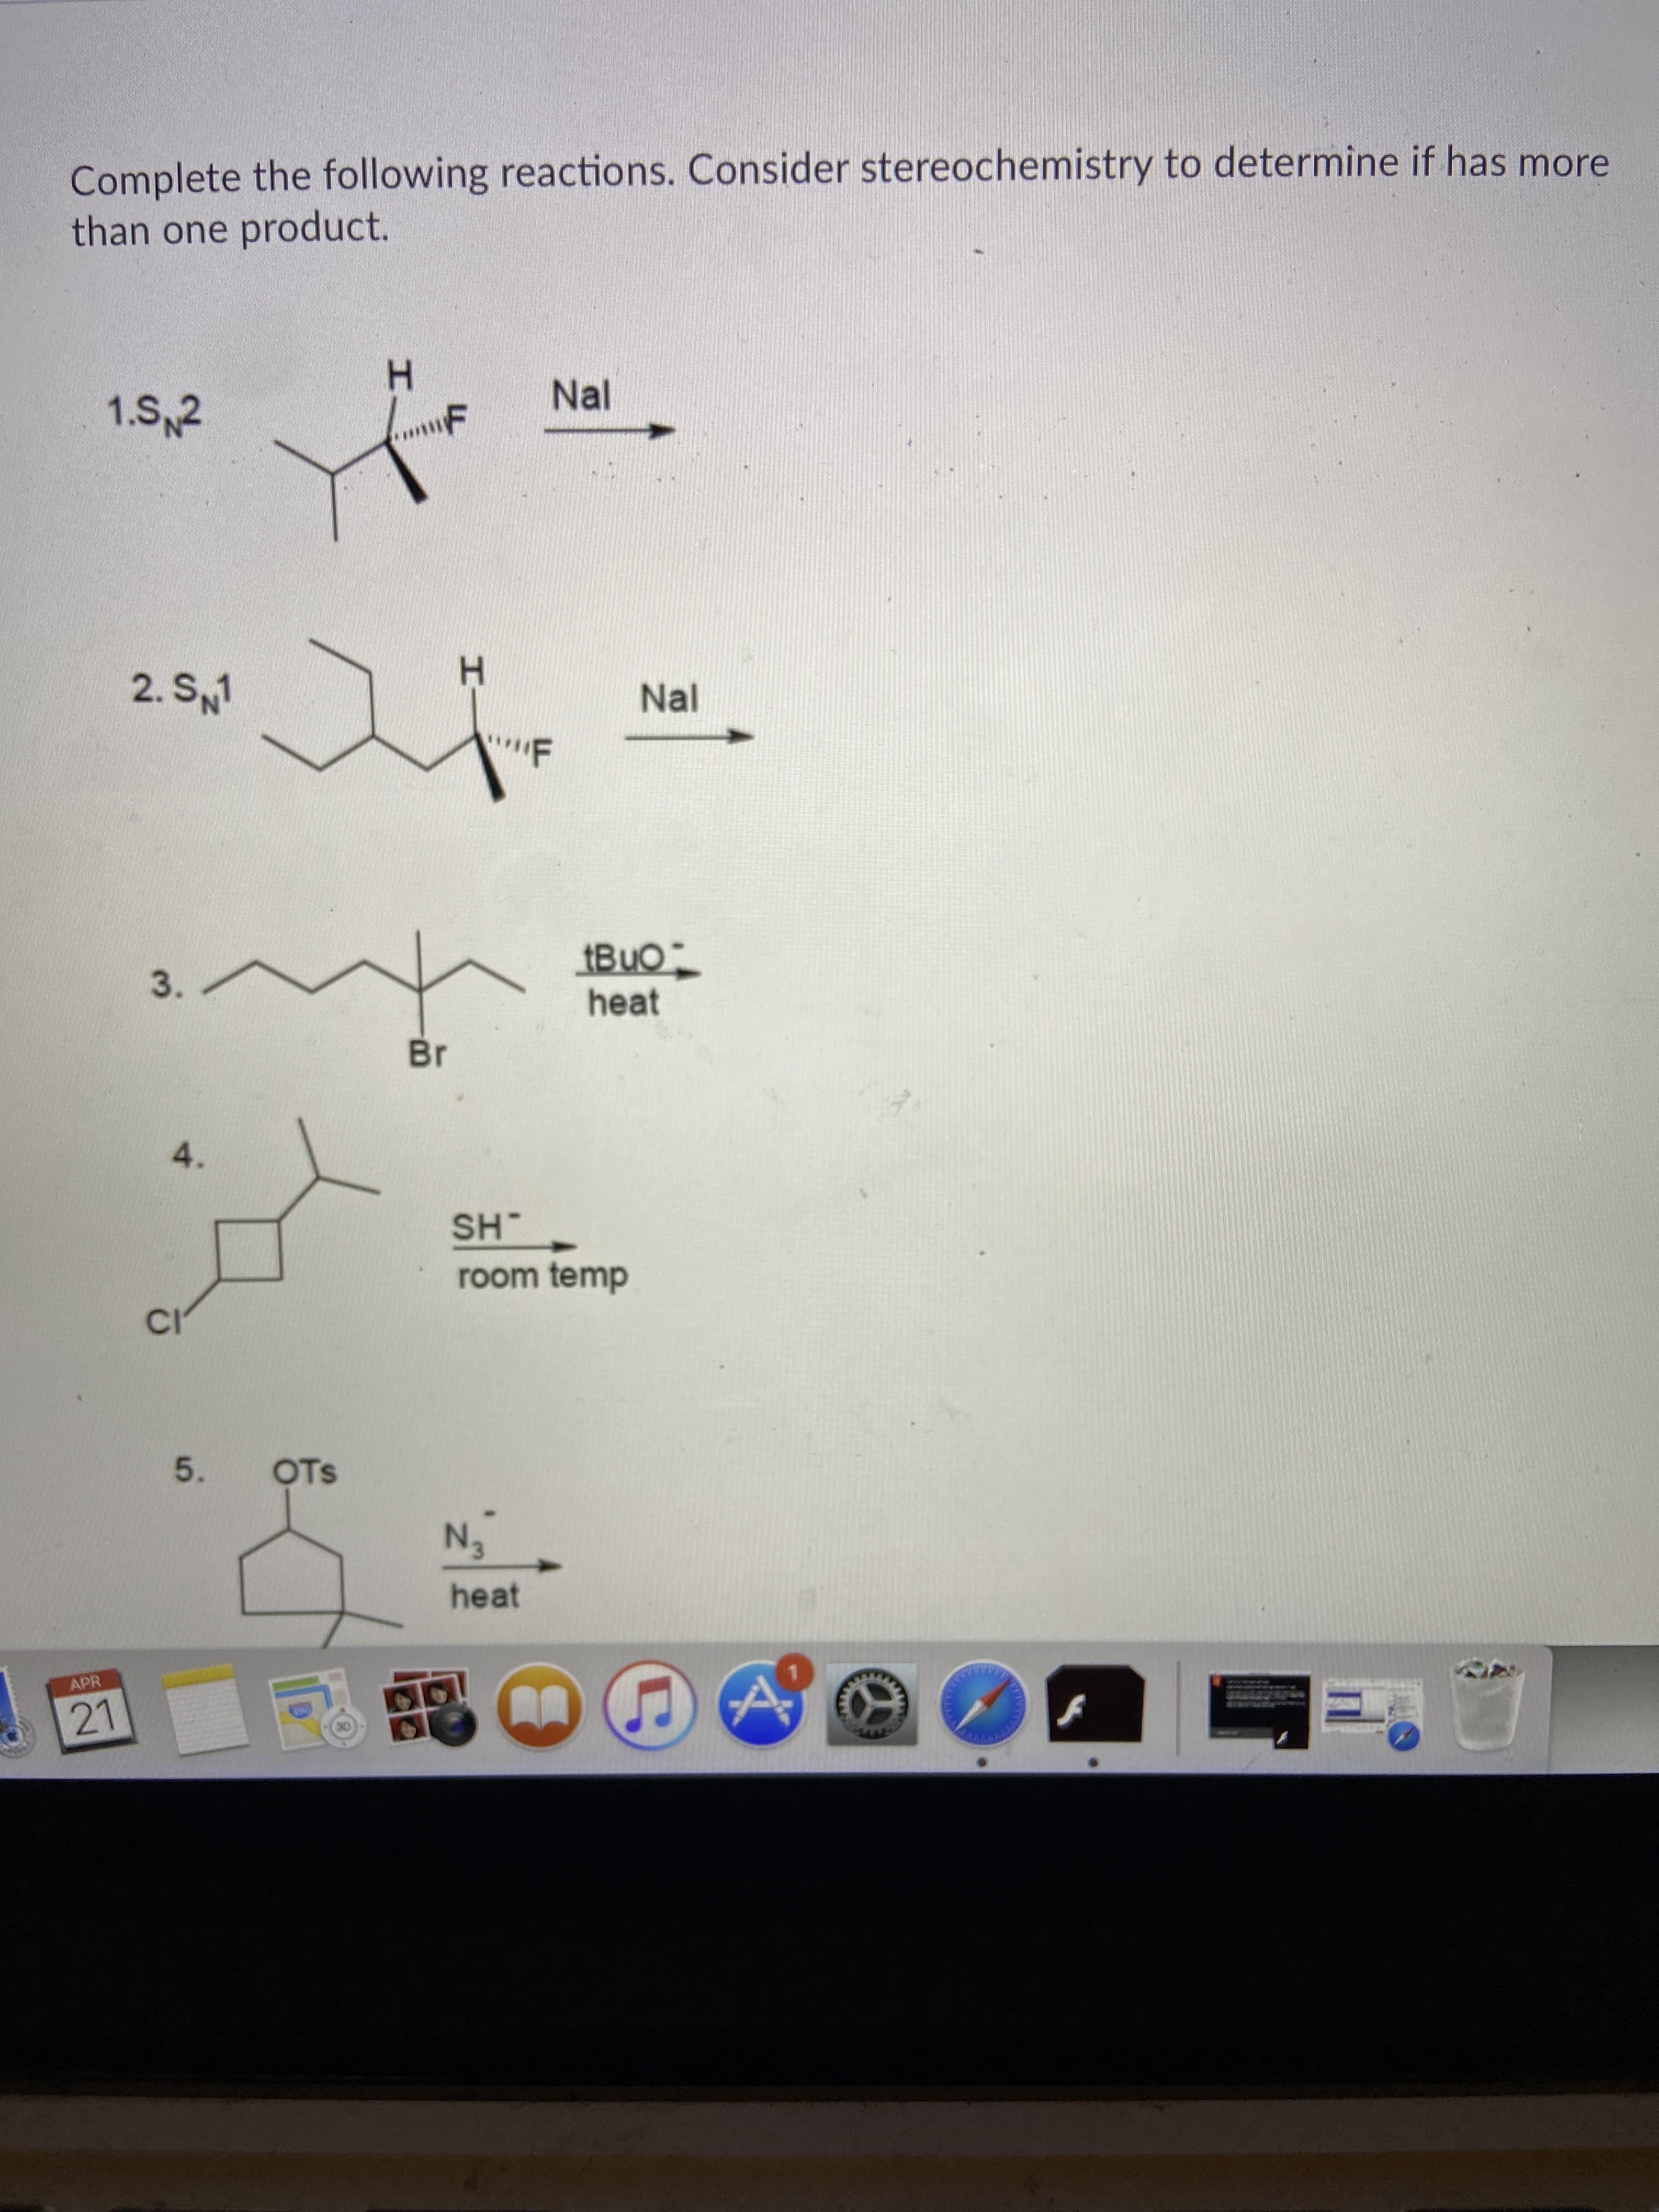 Complete the following reactions. Consider stereochemistry to determine
